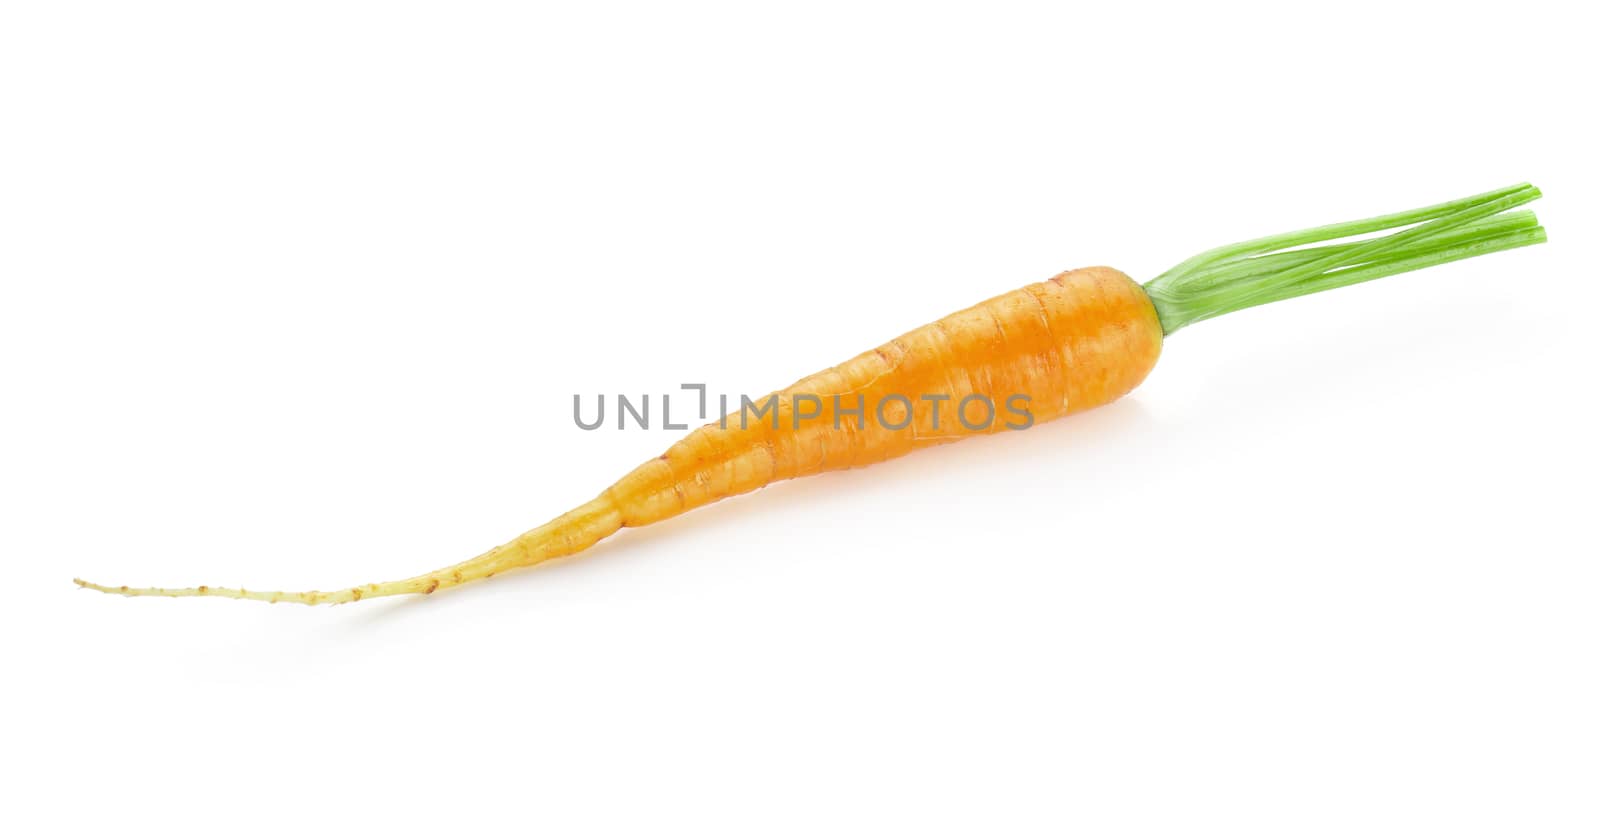 Bunch of baby carrots vegetable isolated on white background.